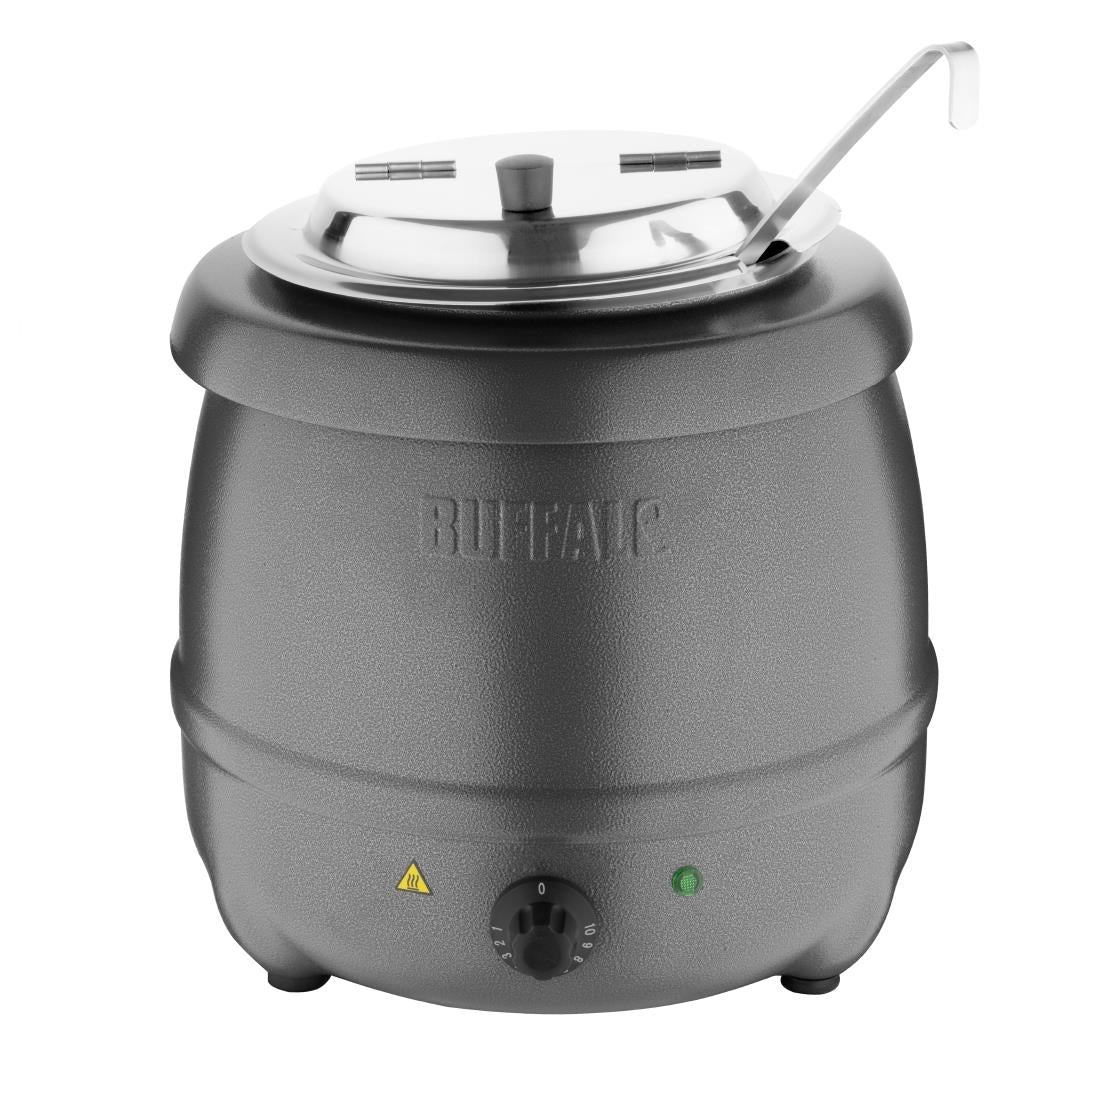 G107 Buffalo Graphite Grey Soup Kettle JD Catering Equipment Solutions Ltd